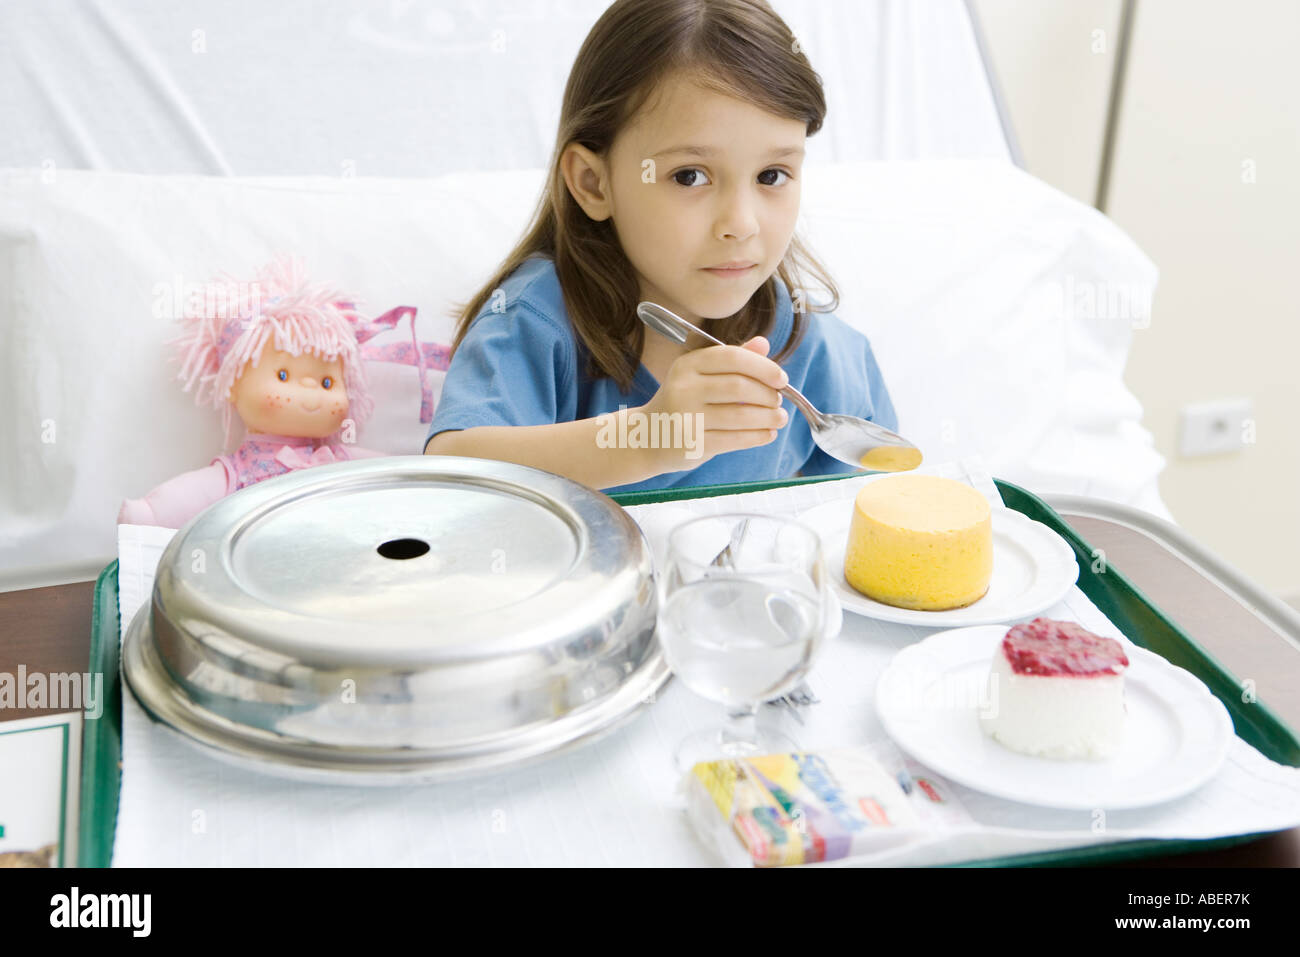 Girl eating meal in hospital bed Stock Photo